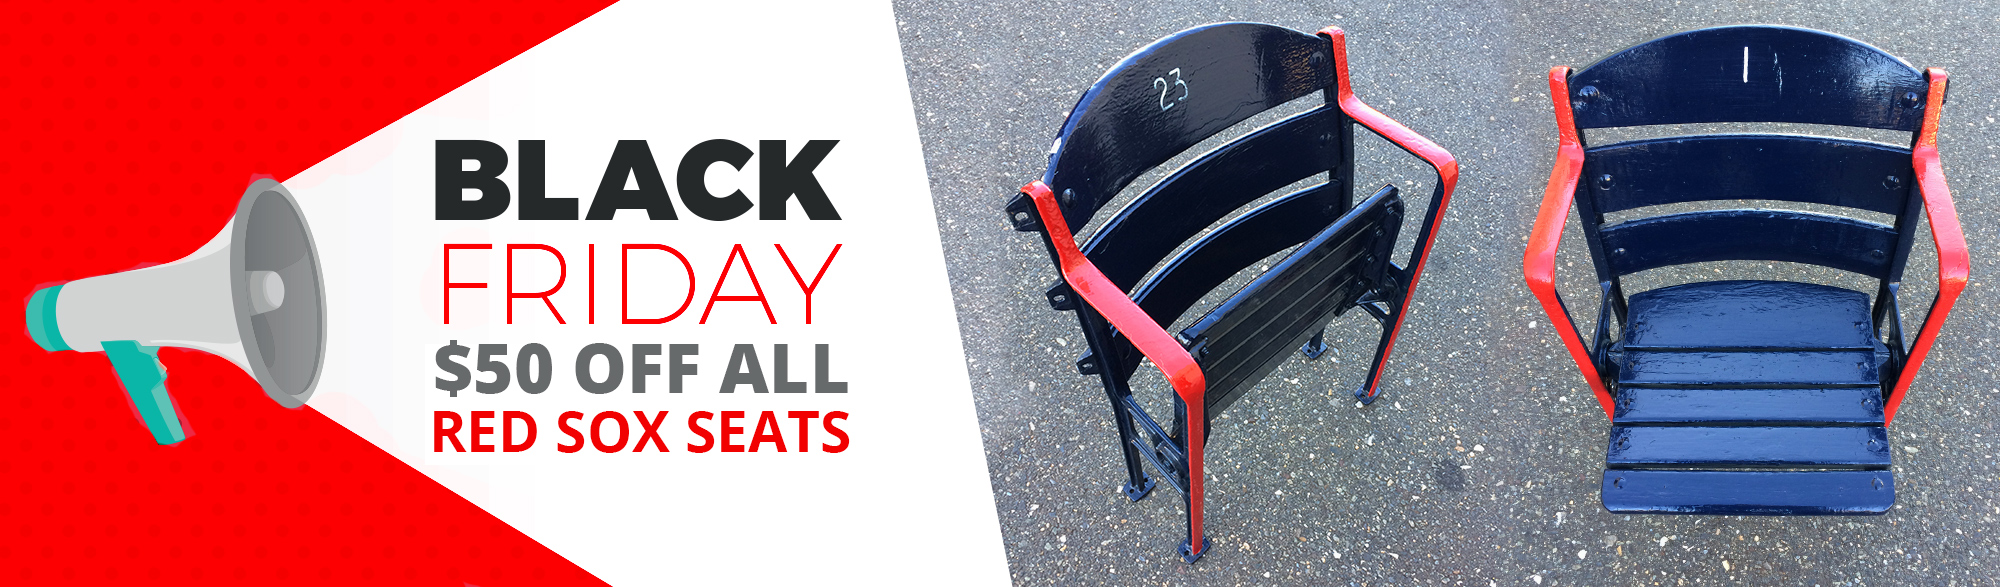 Archer Seating Black Friday Deals, Fenway Park, Boston Red Sox